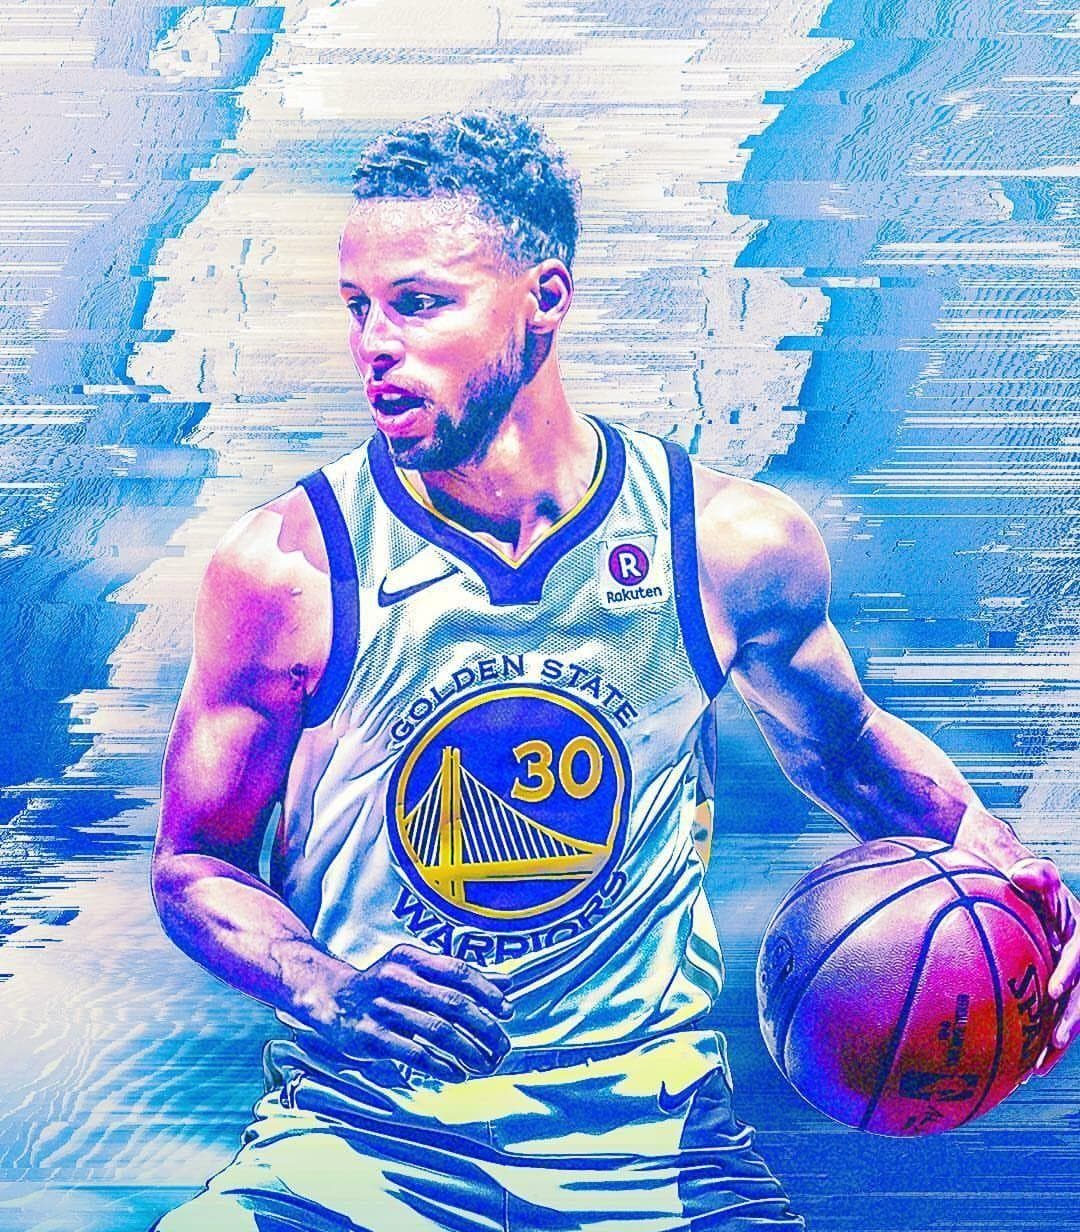 Stephen Curry wallpaper by PaulMB2001 - Download on ZEDGE™ | 9670